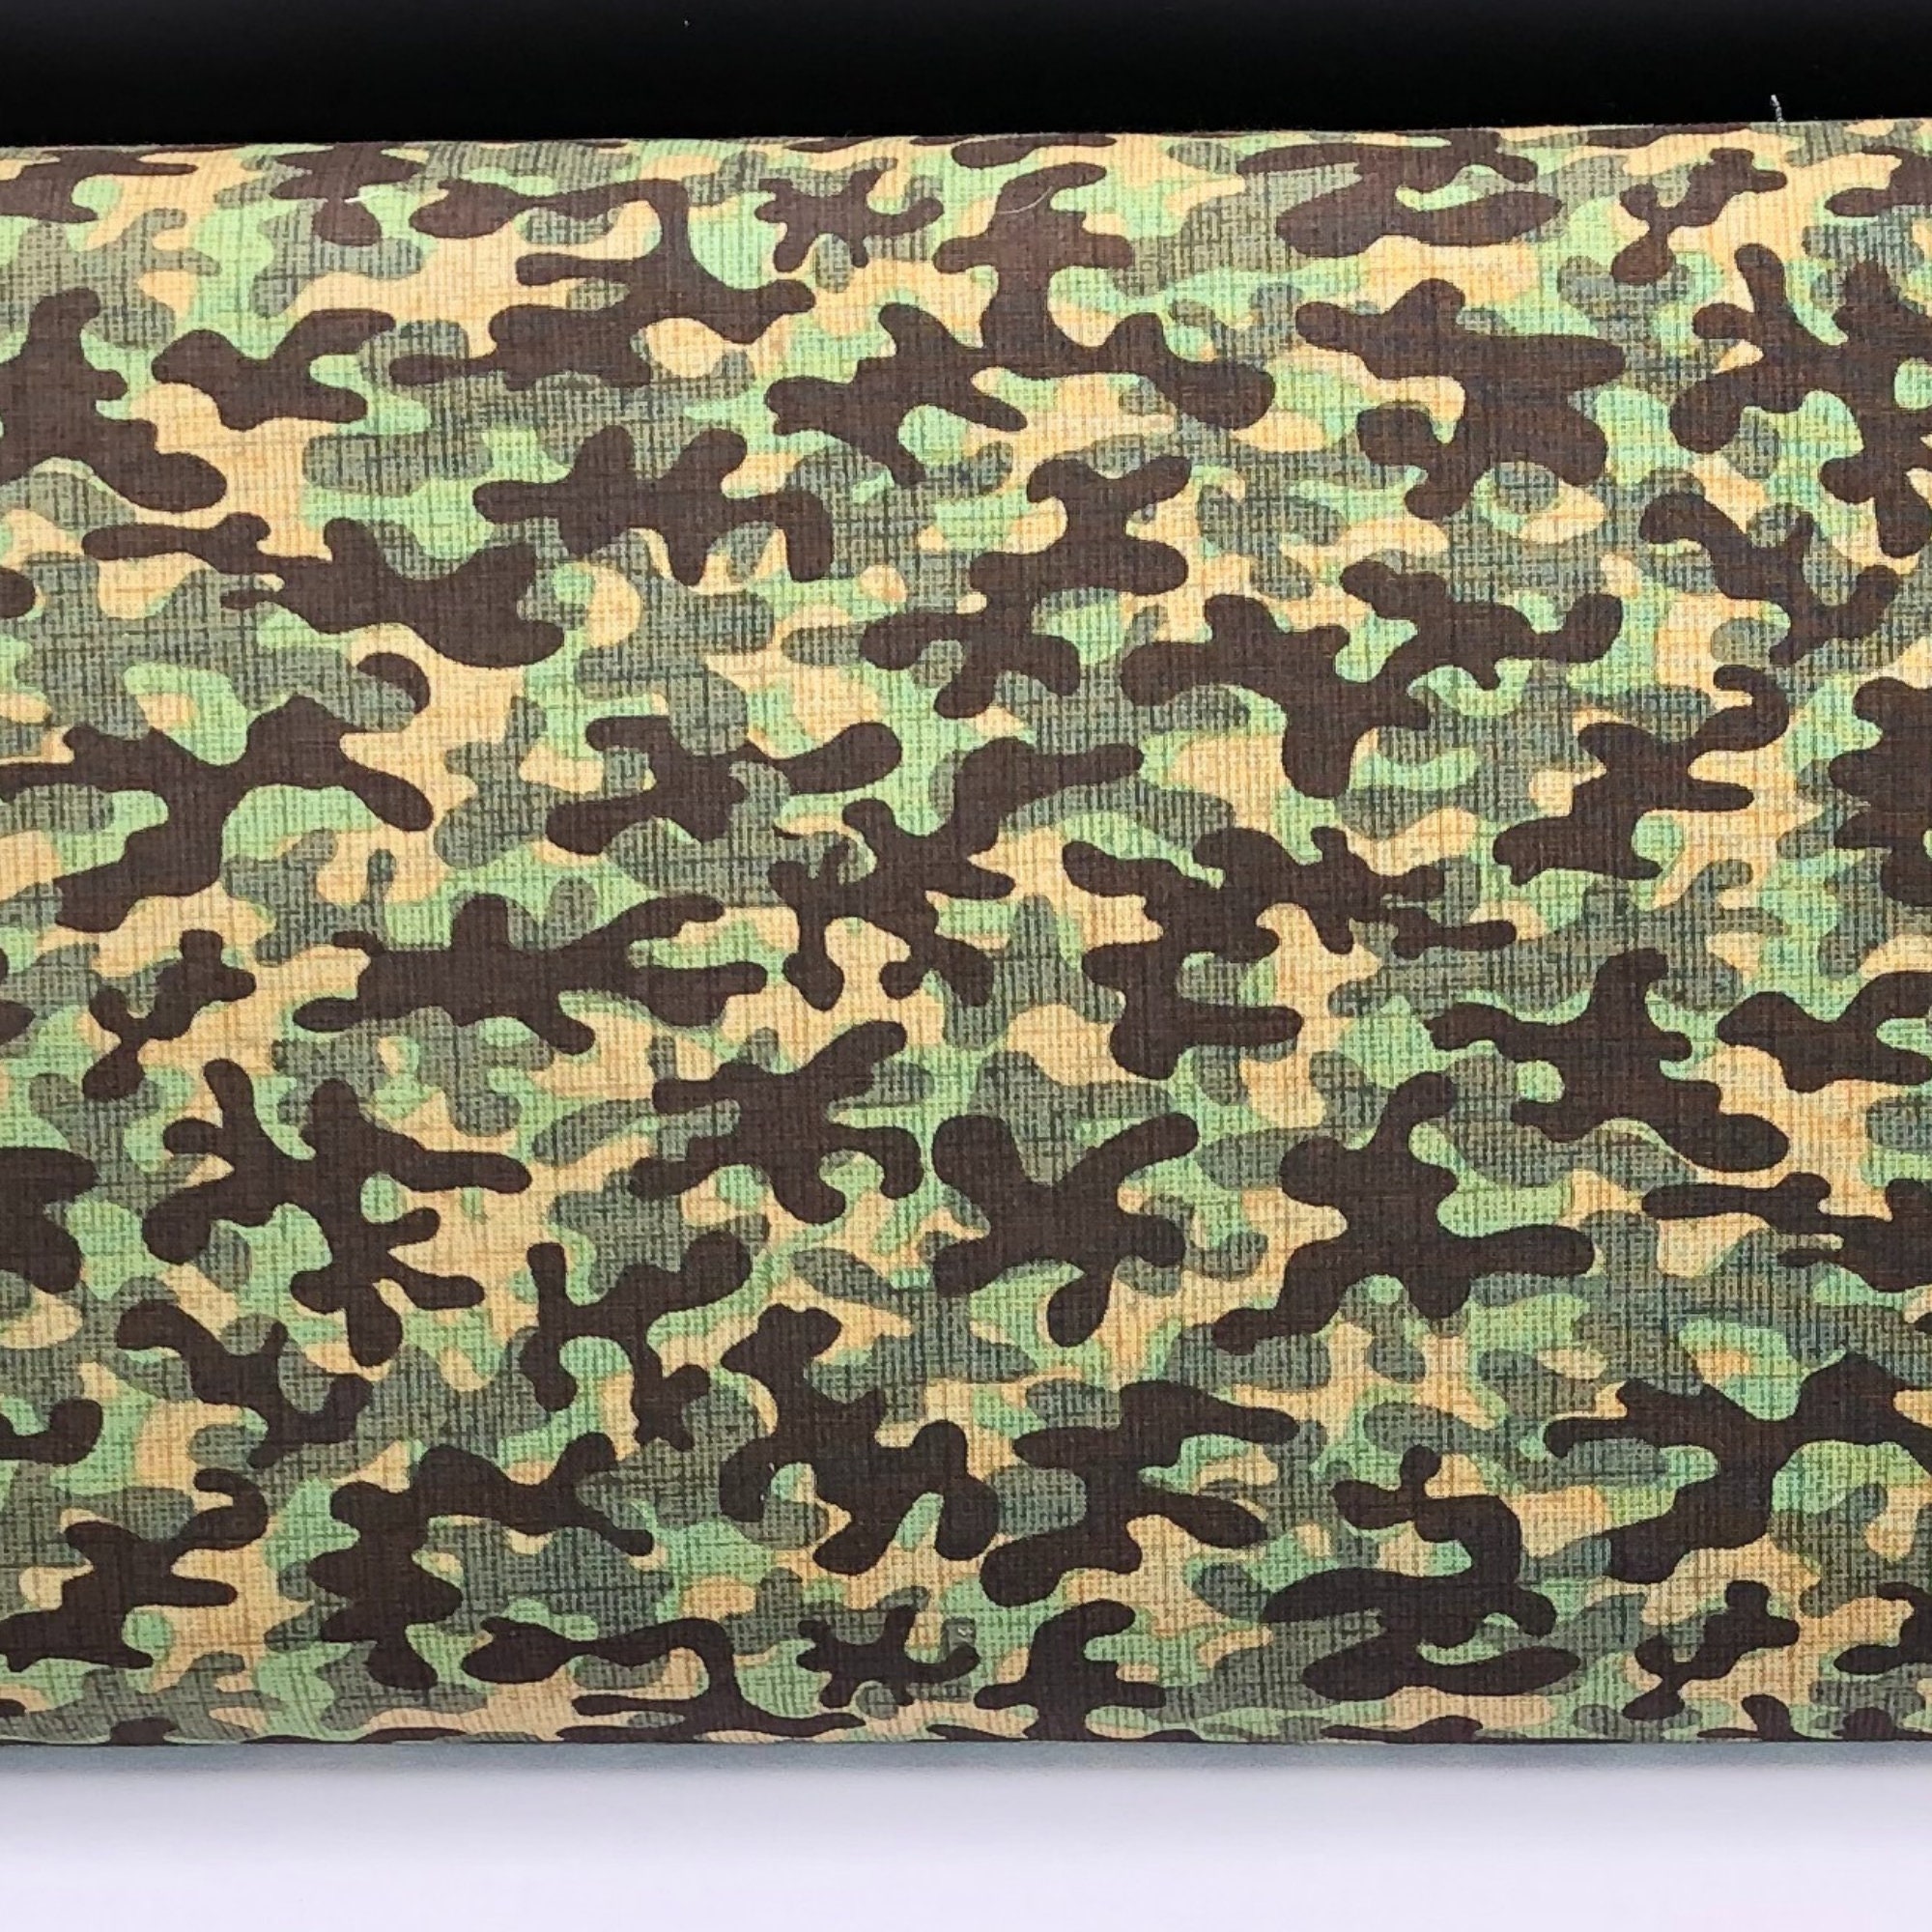 Camo fabric by the yard, brown and green camouflage fabric, brown camo,  green camo, cotton camo, #20598